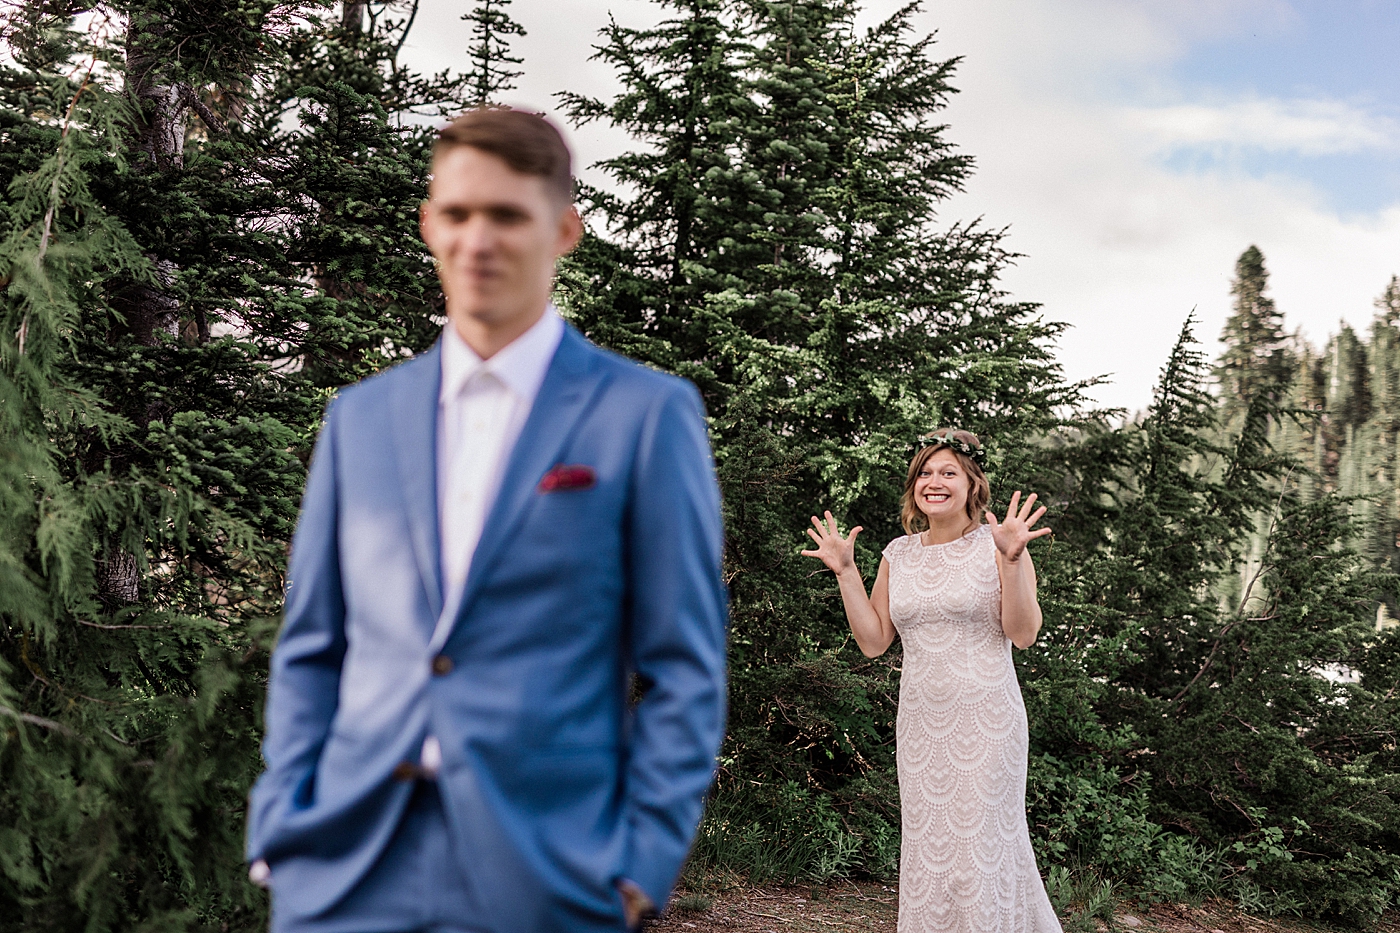 Couples first look at Mount Rainier before elopement ceremony. Photographed by Megan Montalvo Photography. 